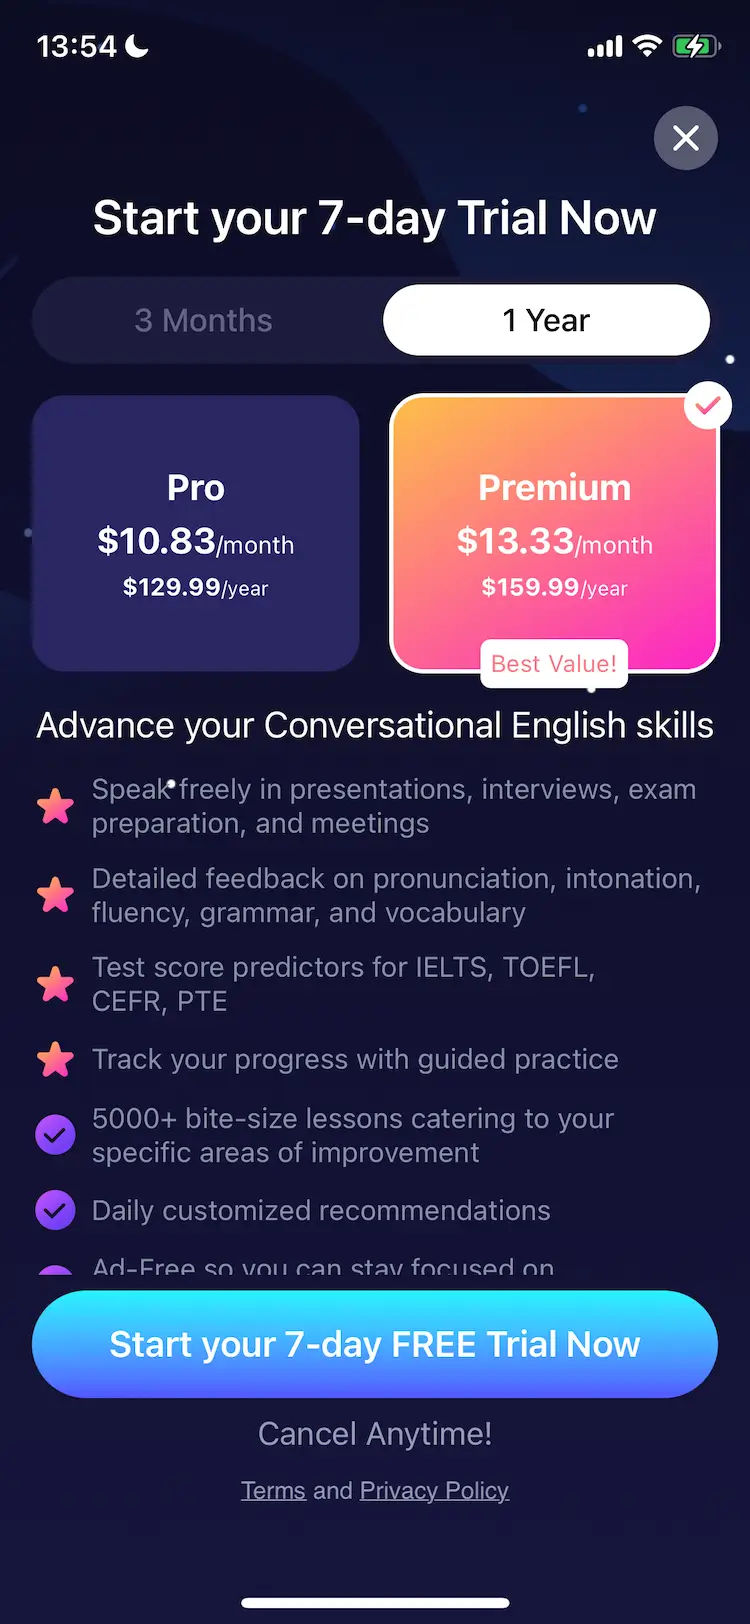 A mobile paywall design example by Memrise AI Language Learning from the Education category